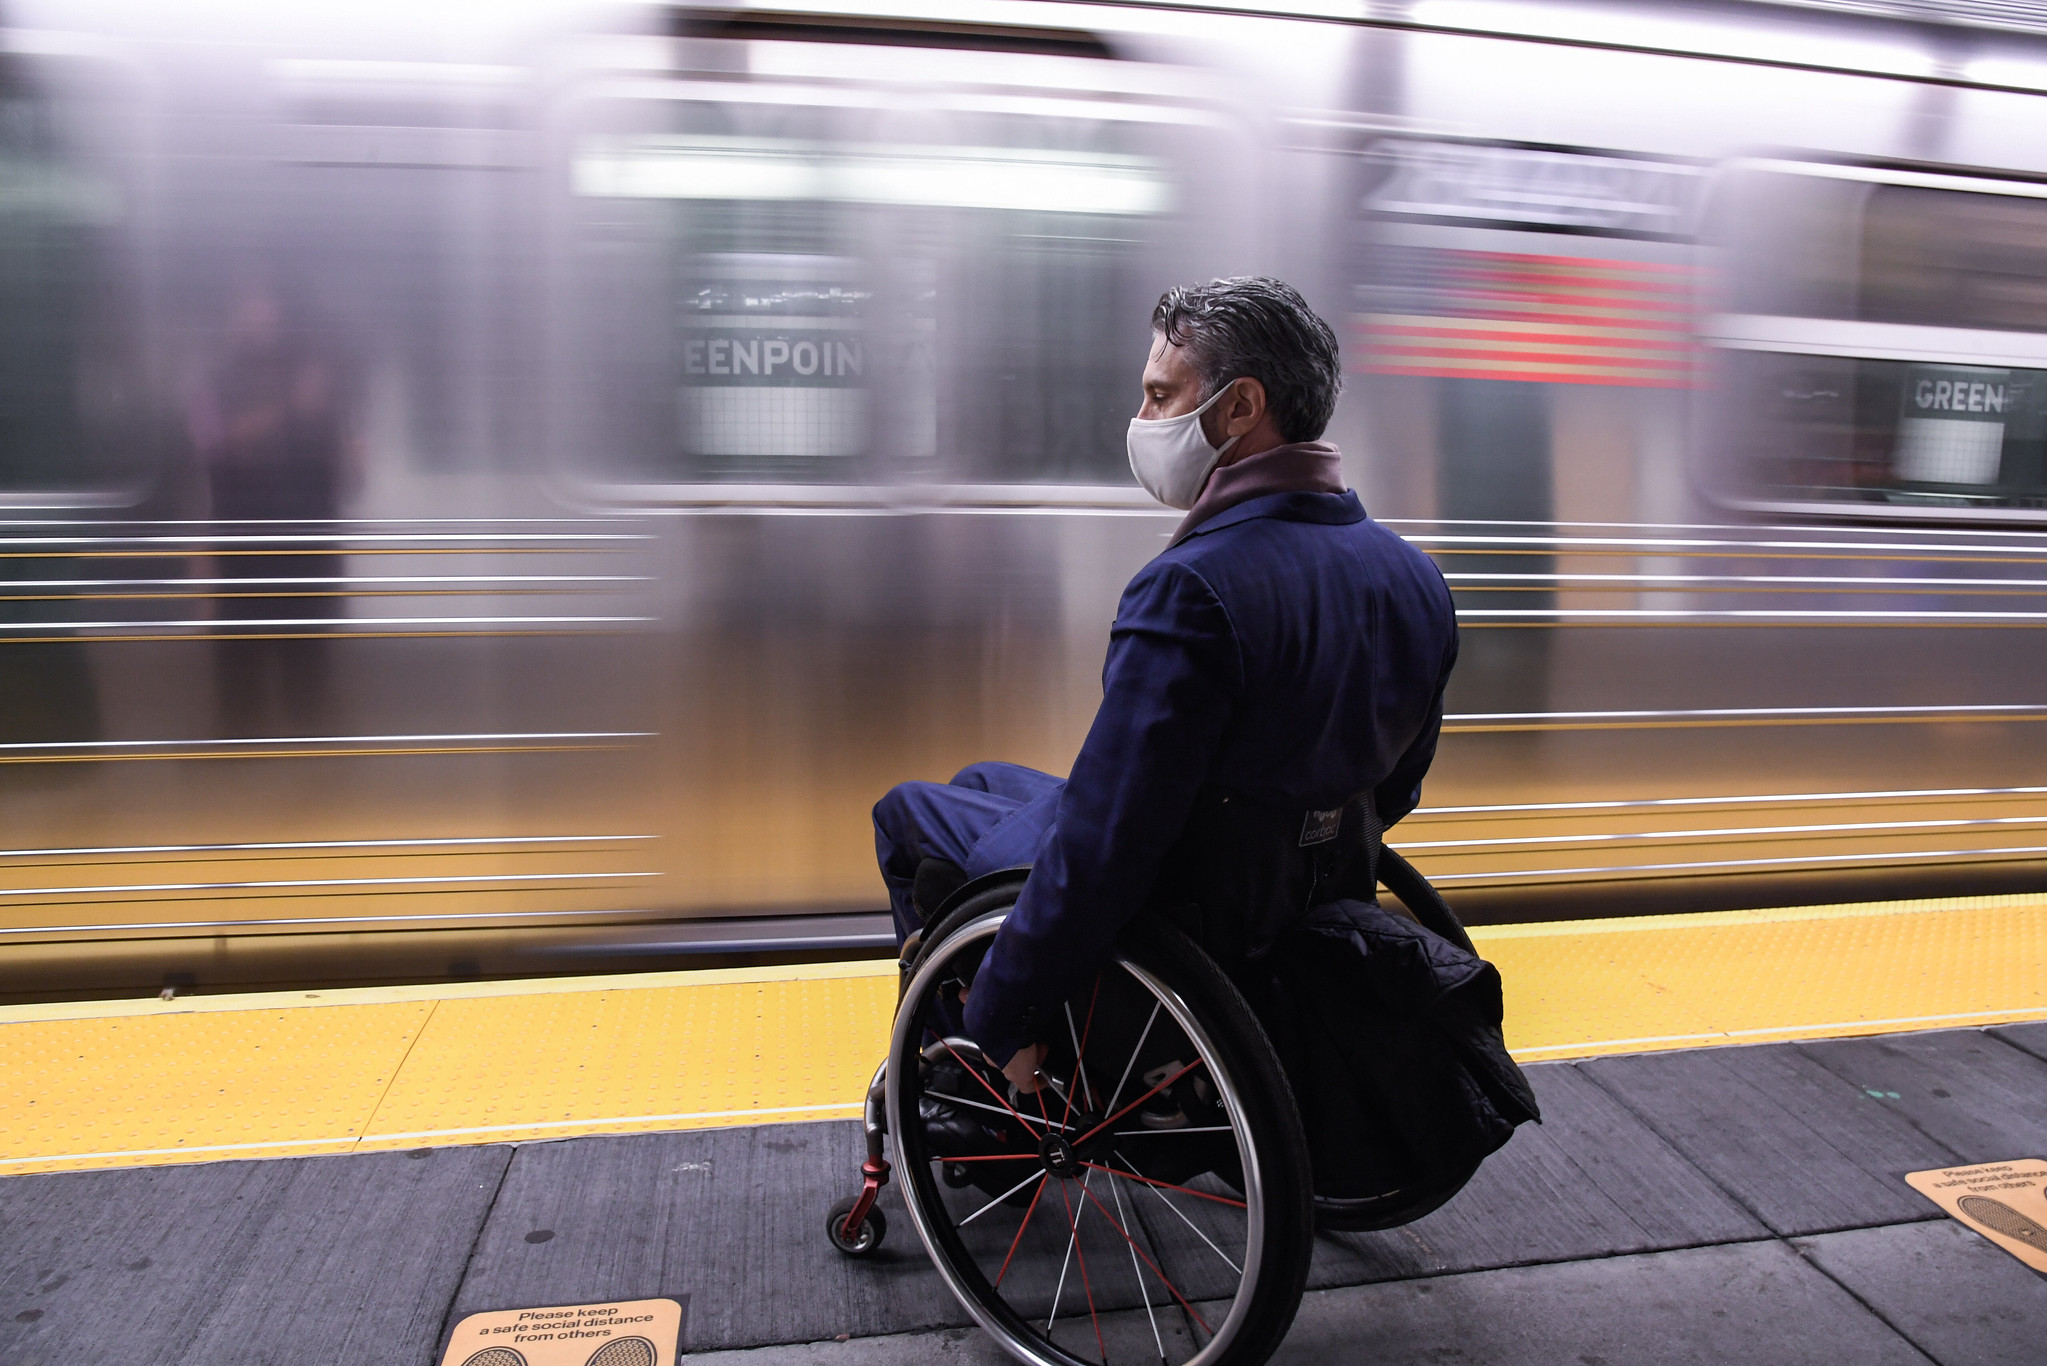 Man in wheelchair waits for train at platform, train moving in background